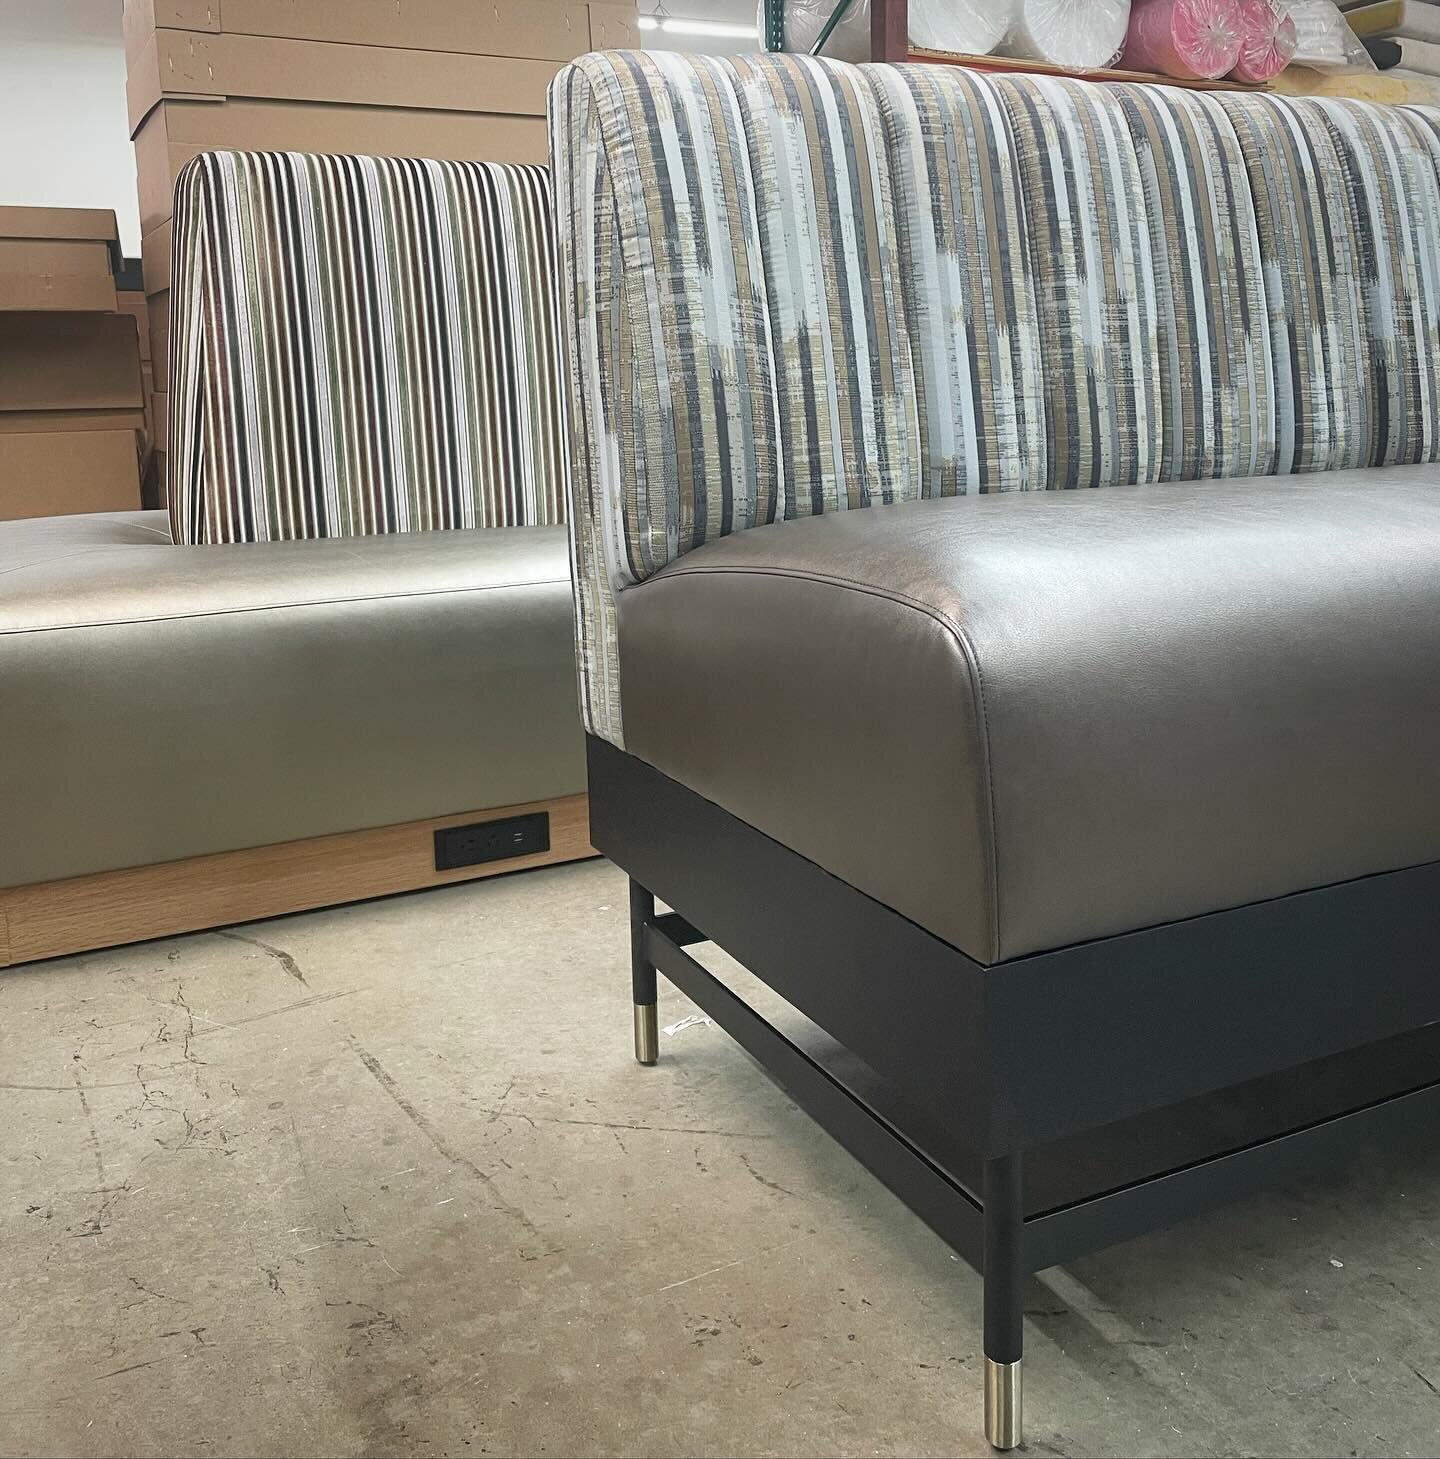 Pattern-play, power integration, and powder-coated custom steel! We&rsquo;re shipping out a large order of custom seating for a hospitality project in Seattle today. 
#hospitalitydesign #customfurniture #workplacedesign #banquettes #emblembuilt